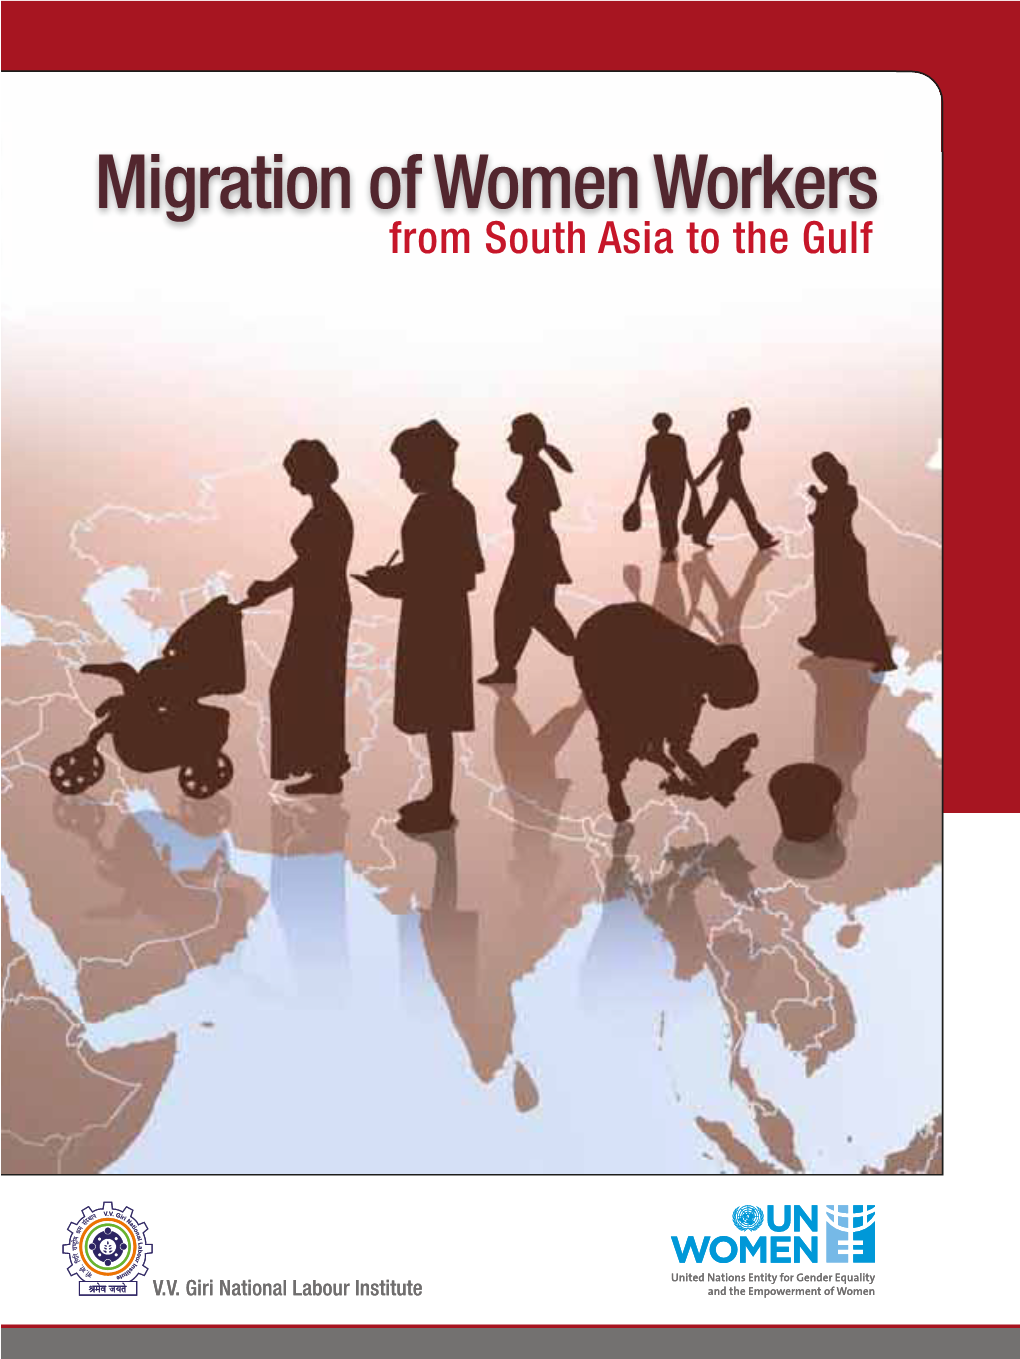 Migration of Women Workers from South Asia to the Gulf